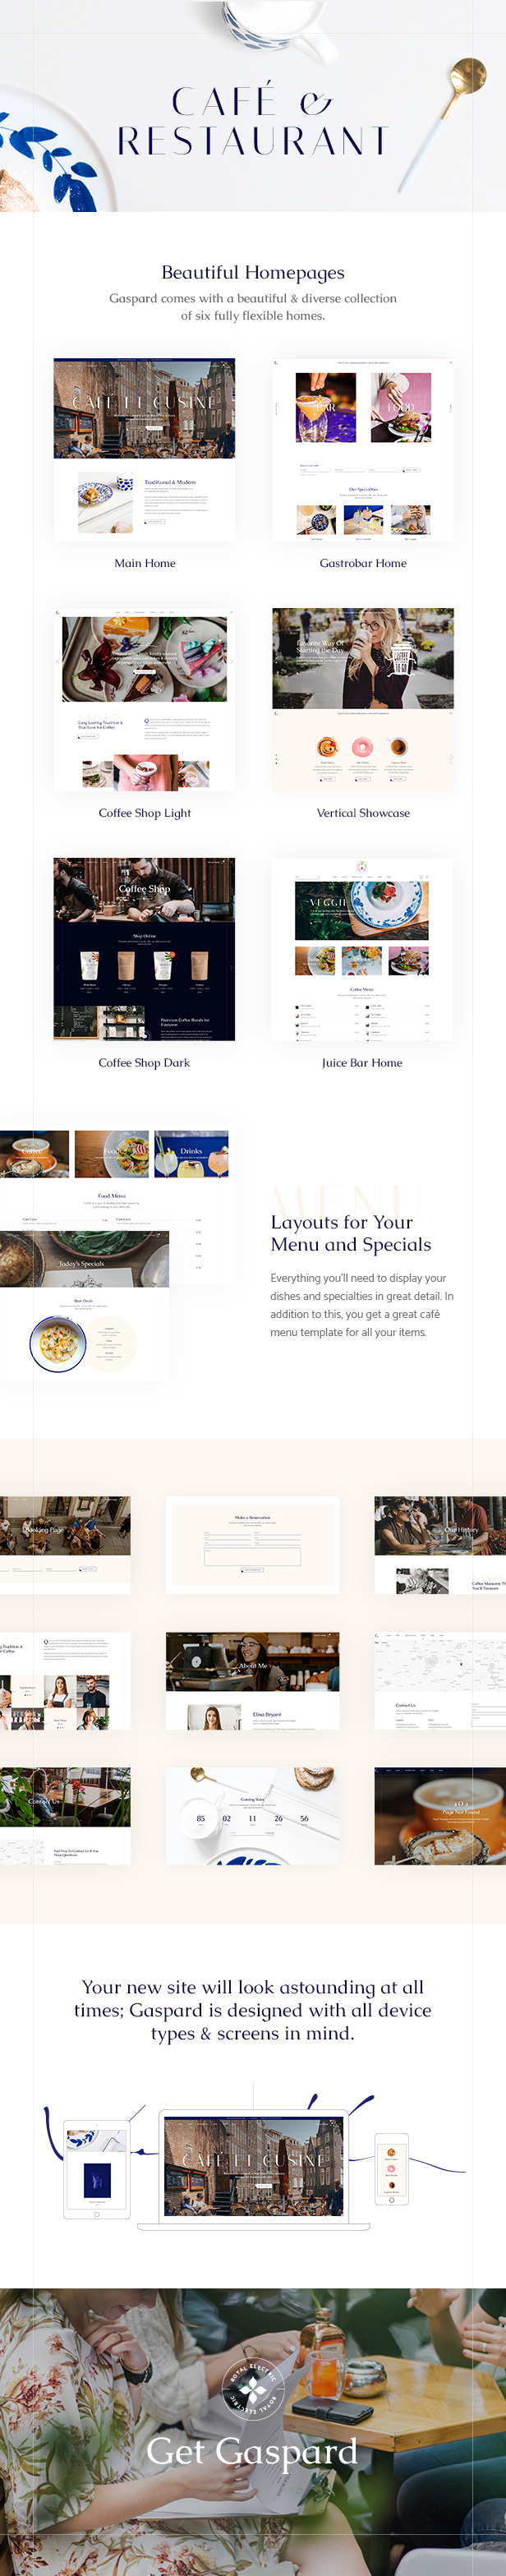 A selection of beautiful restaurant-themed WordPress template pages.